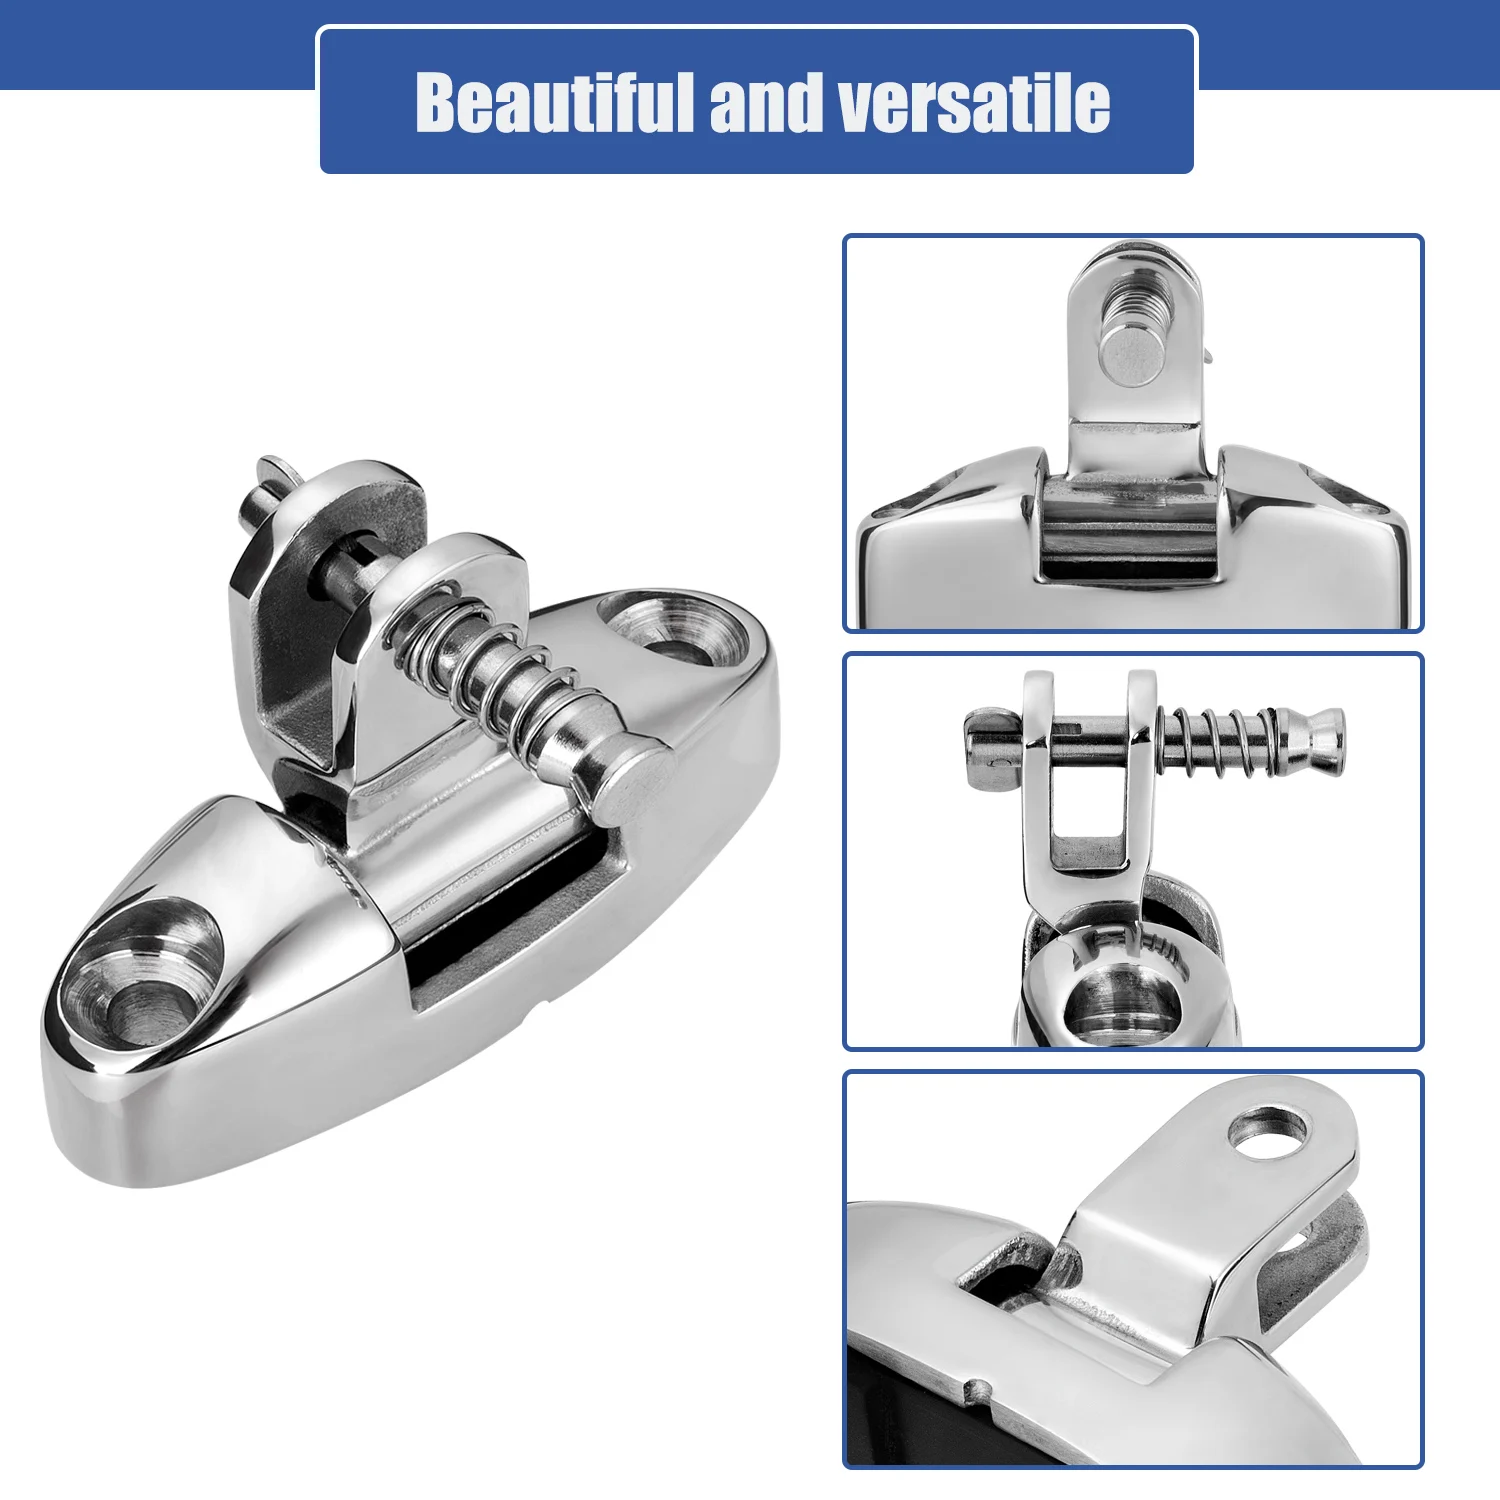 Boat Bimini Top Swivel Deck Hinge 180 Degree Adjustable, with Removable Pin,  Solid 316 Stainless Steel Marine Top Hardware